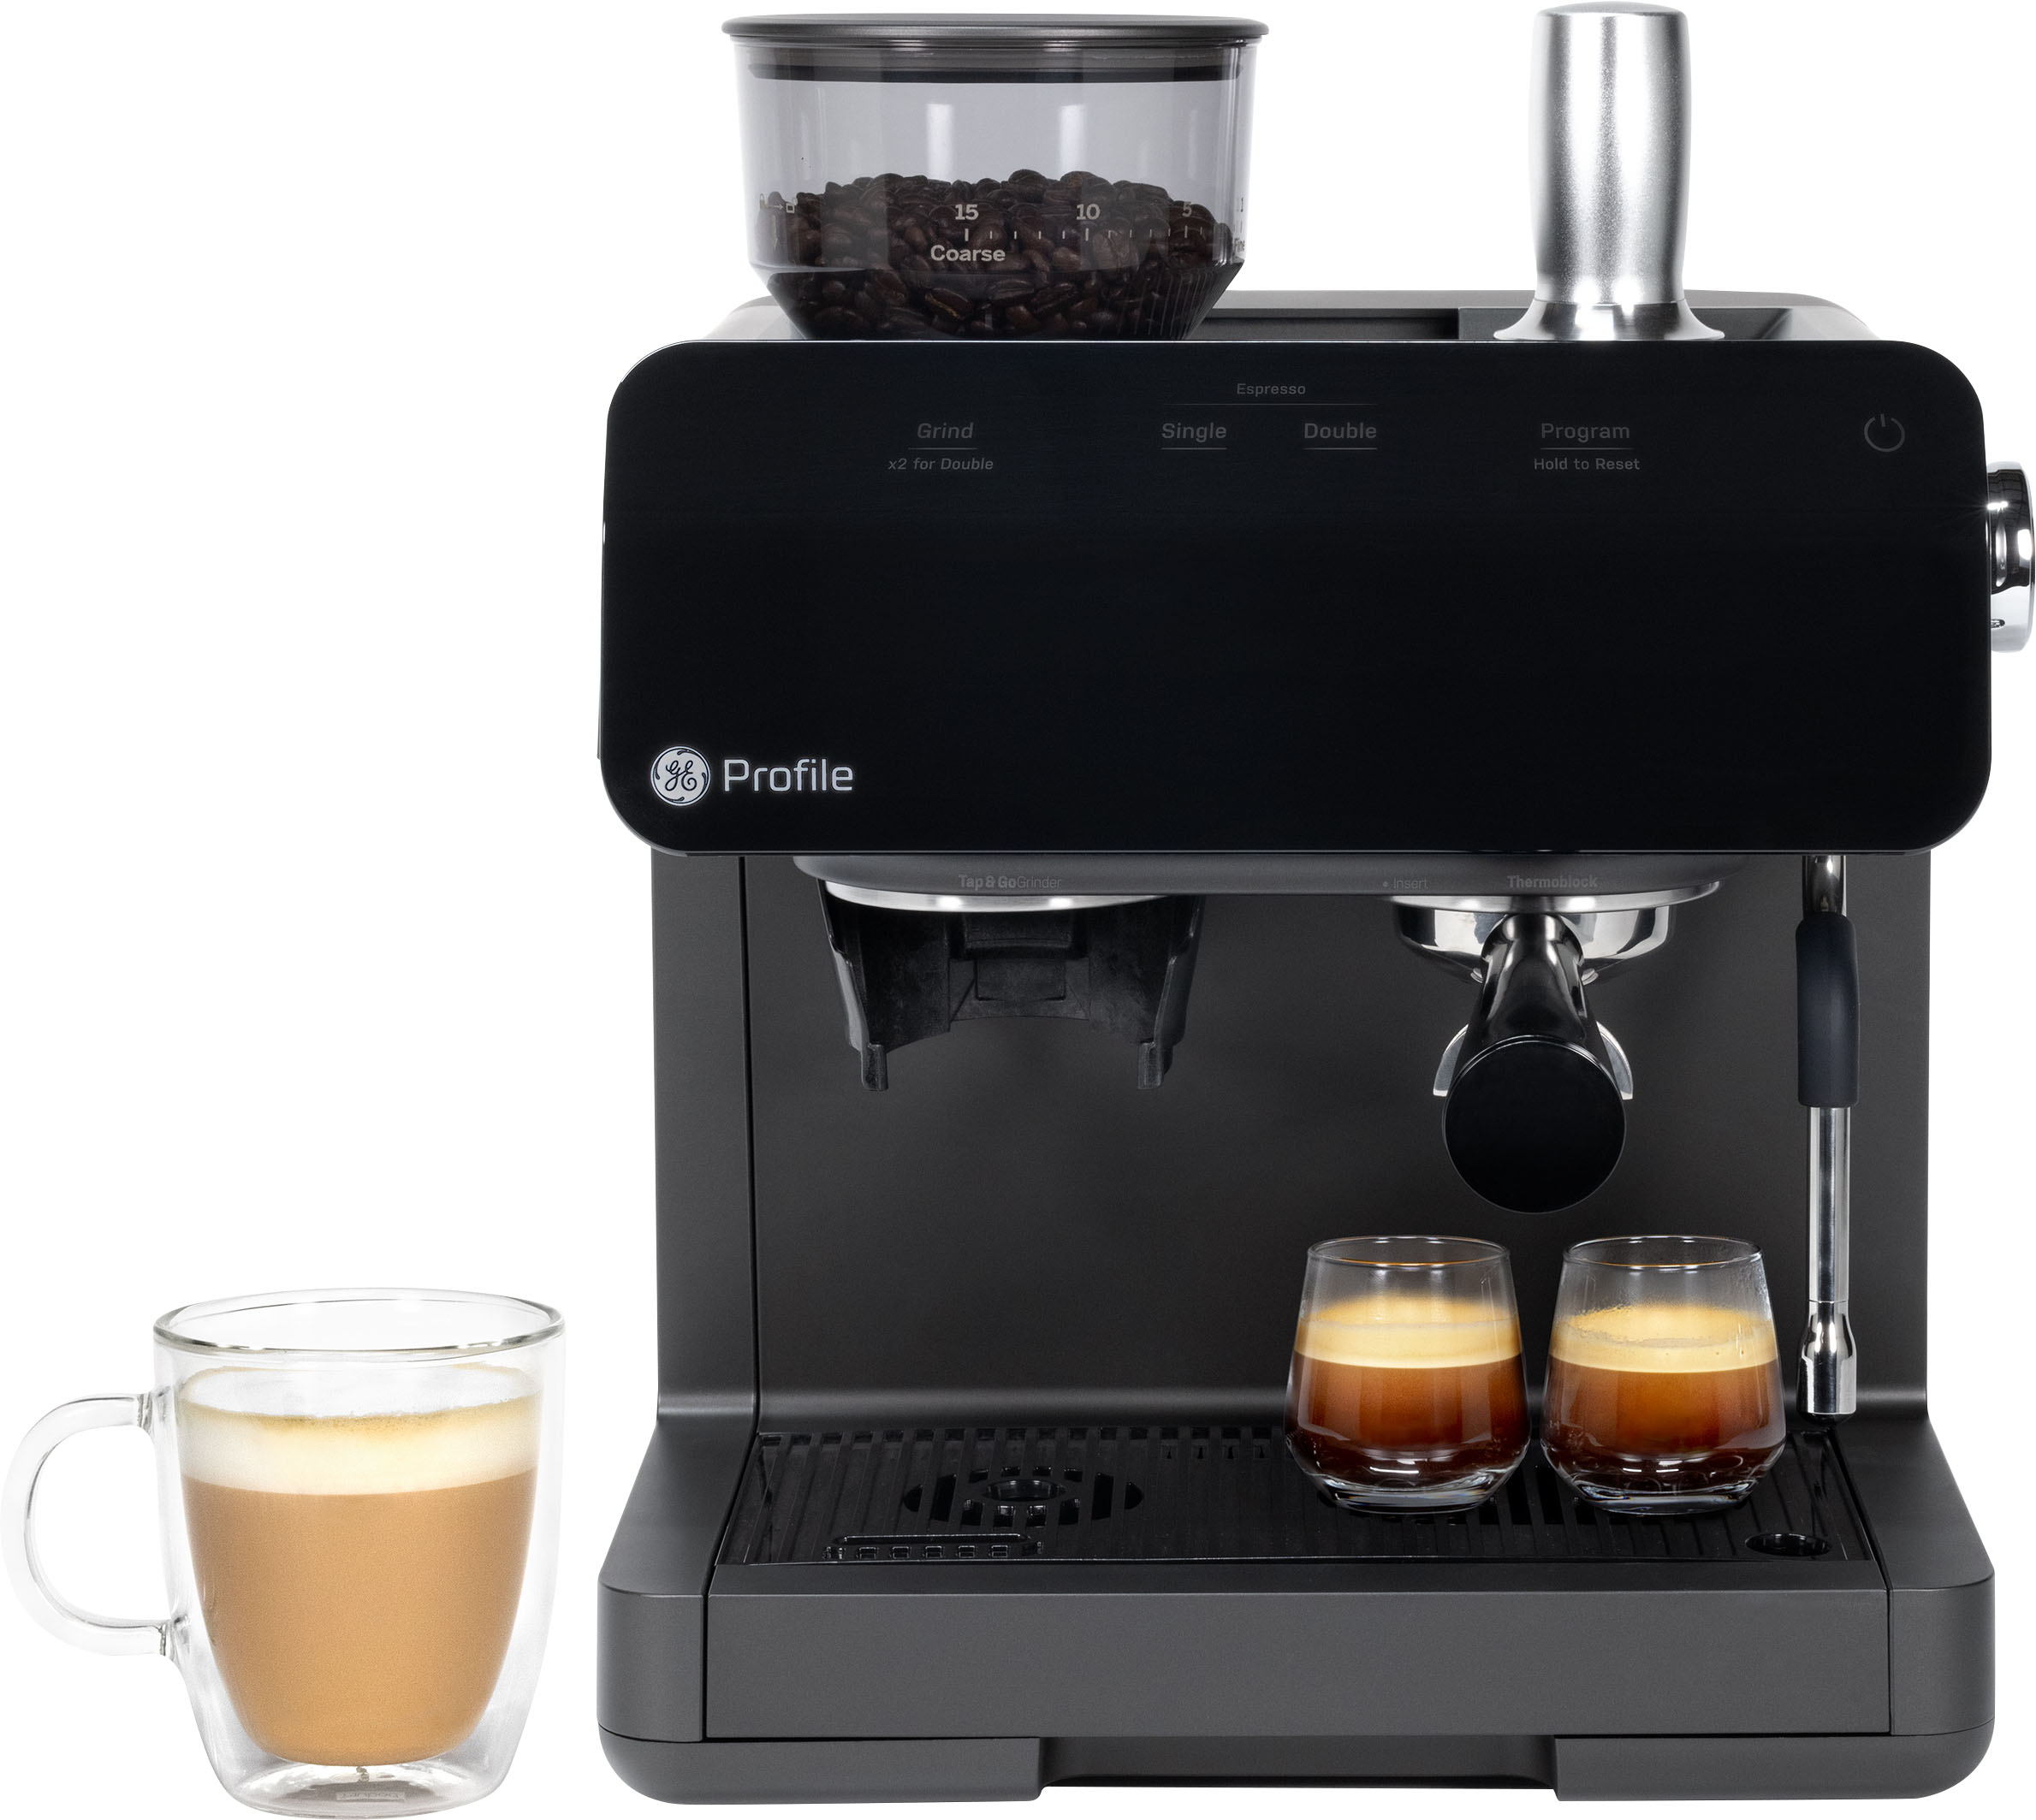 Built-in Fully Automatic Coffee Machines, Built-In Stainless Steel Coffee  Maker